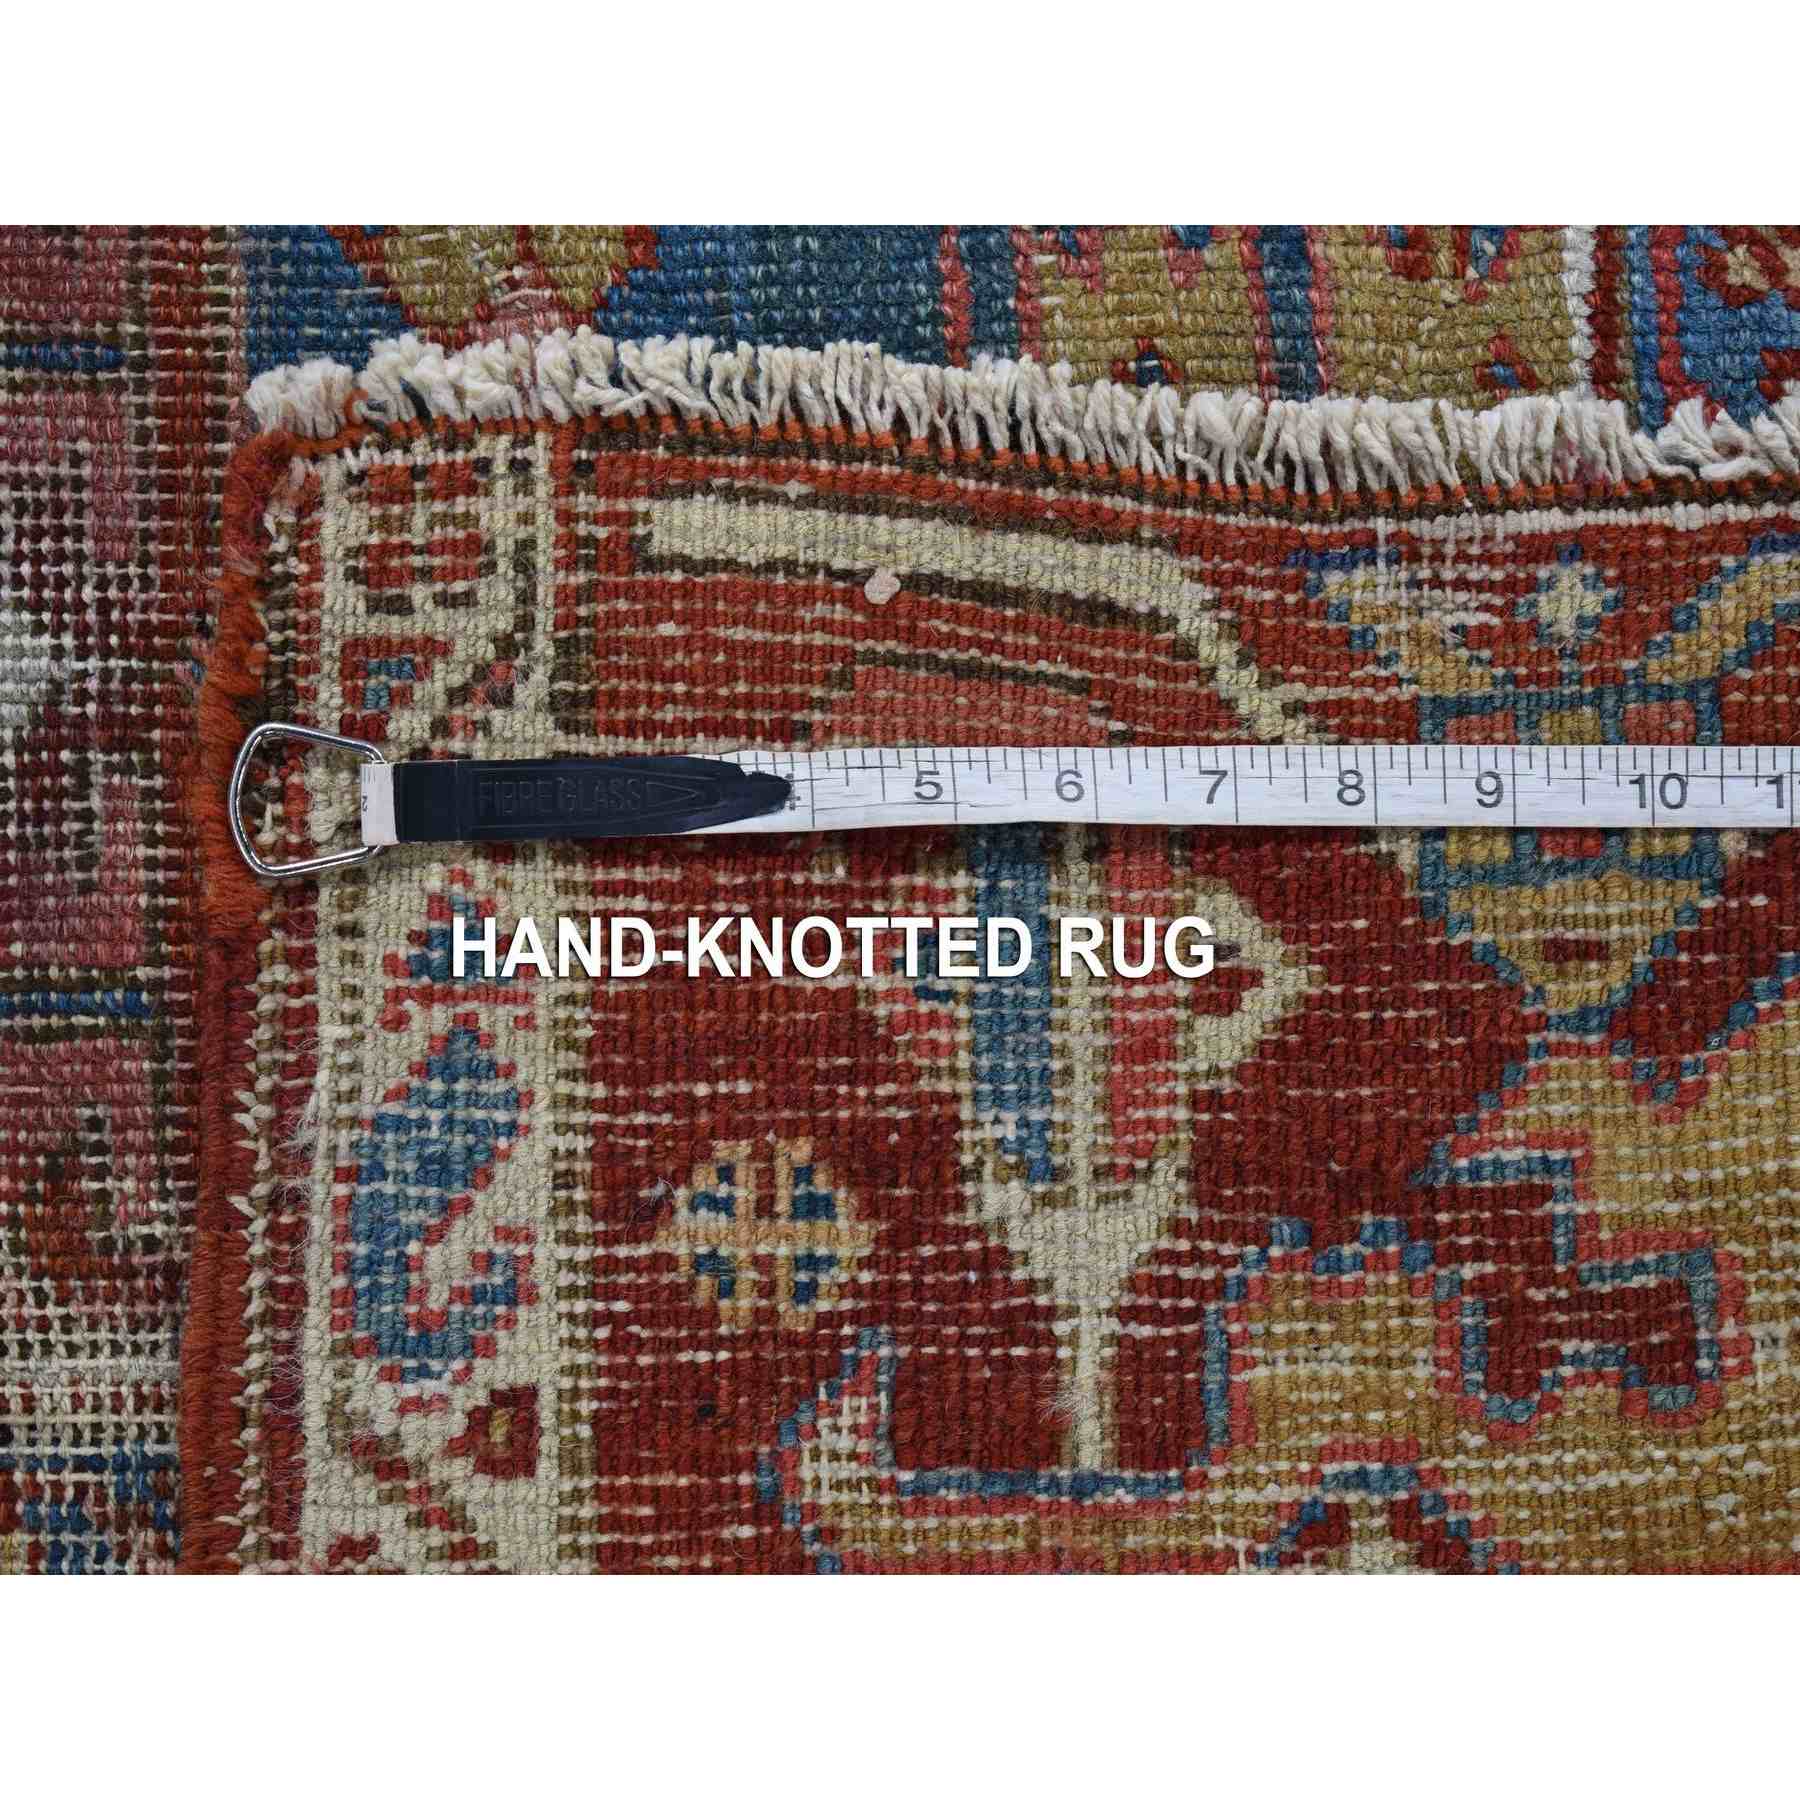 Antique-Hand-Knotted-Rug-401470